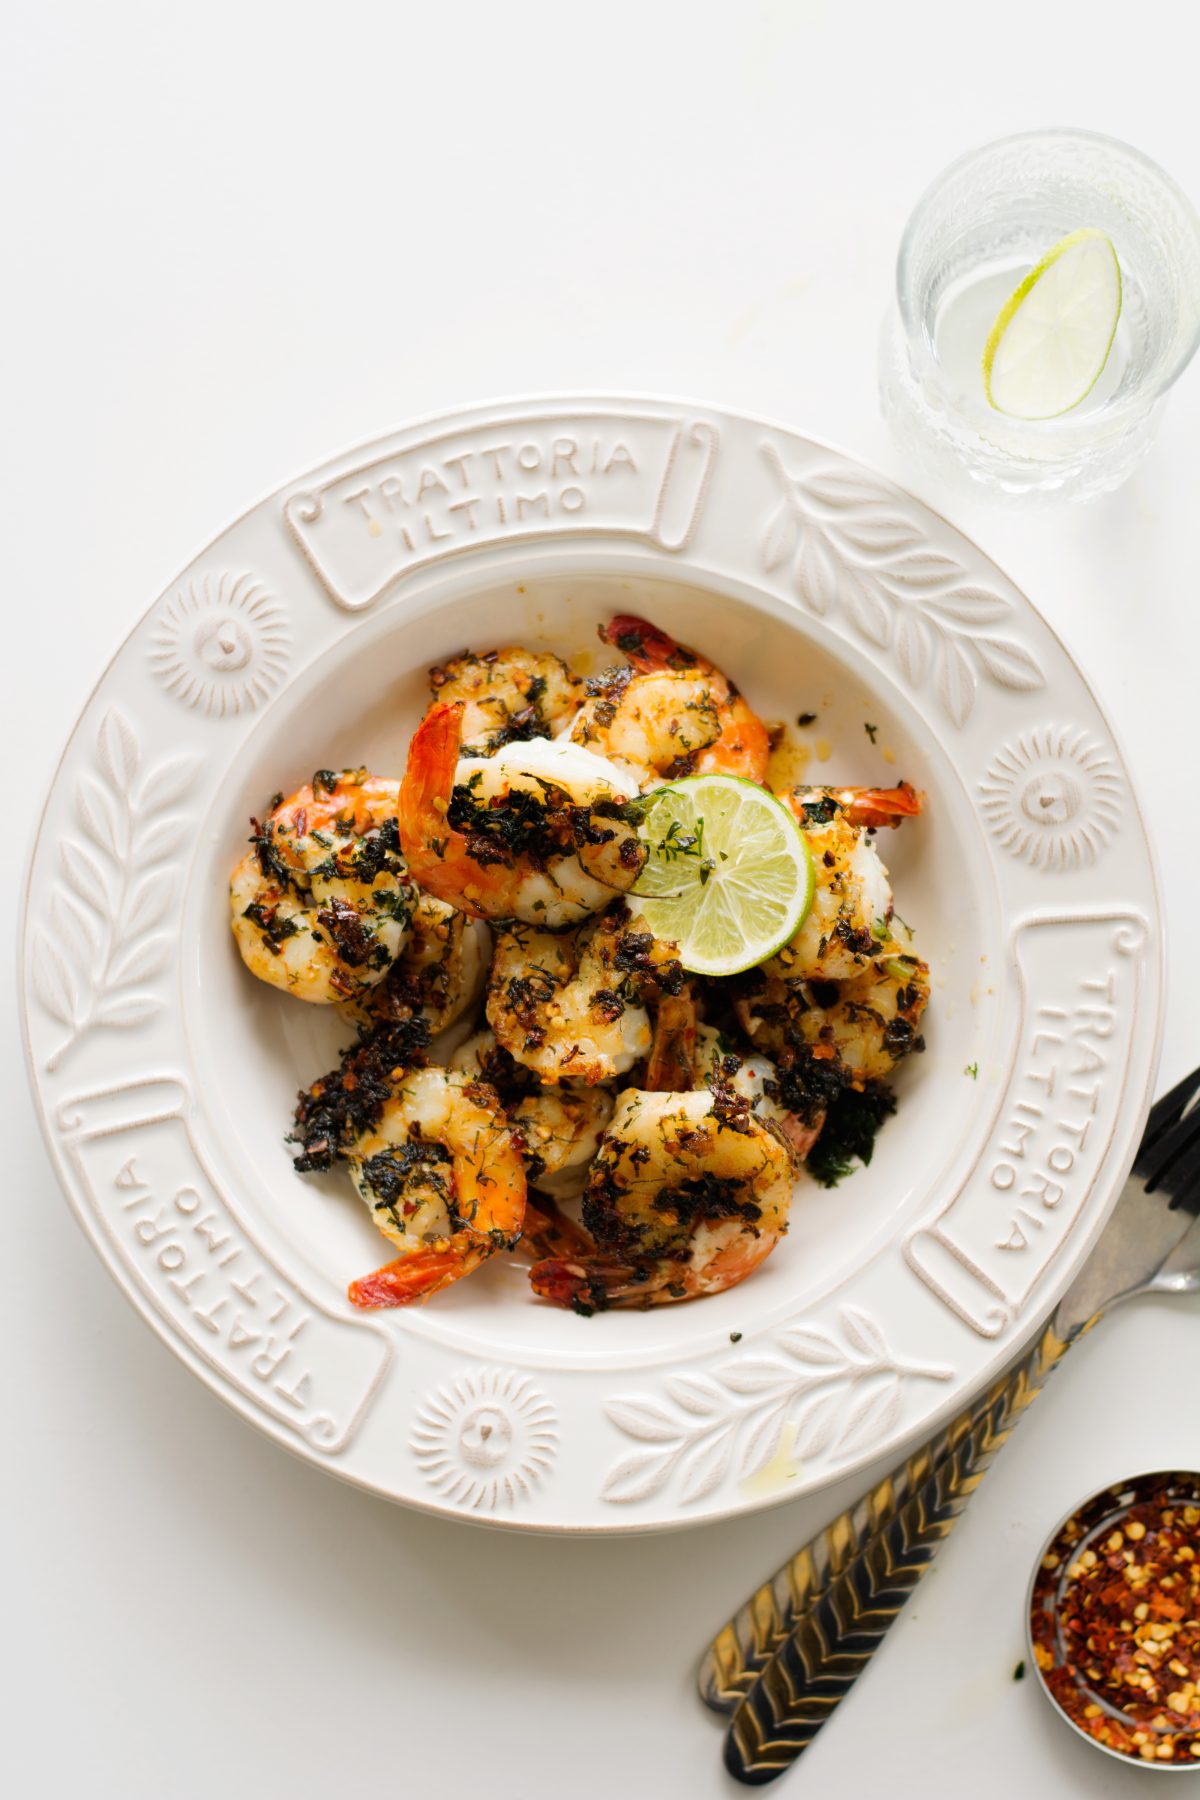 Grilled Prawns with Herbs and Chilli, simple and delicious - thespiceadventuress.com